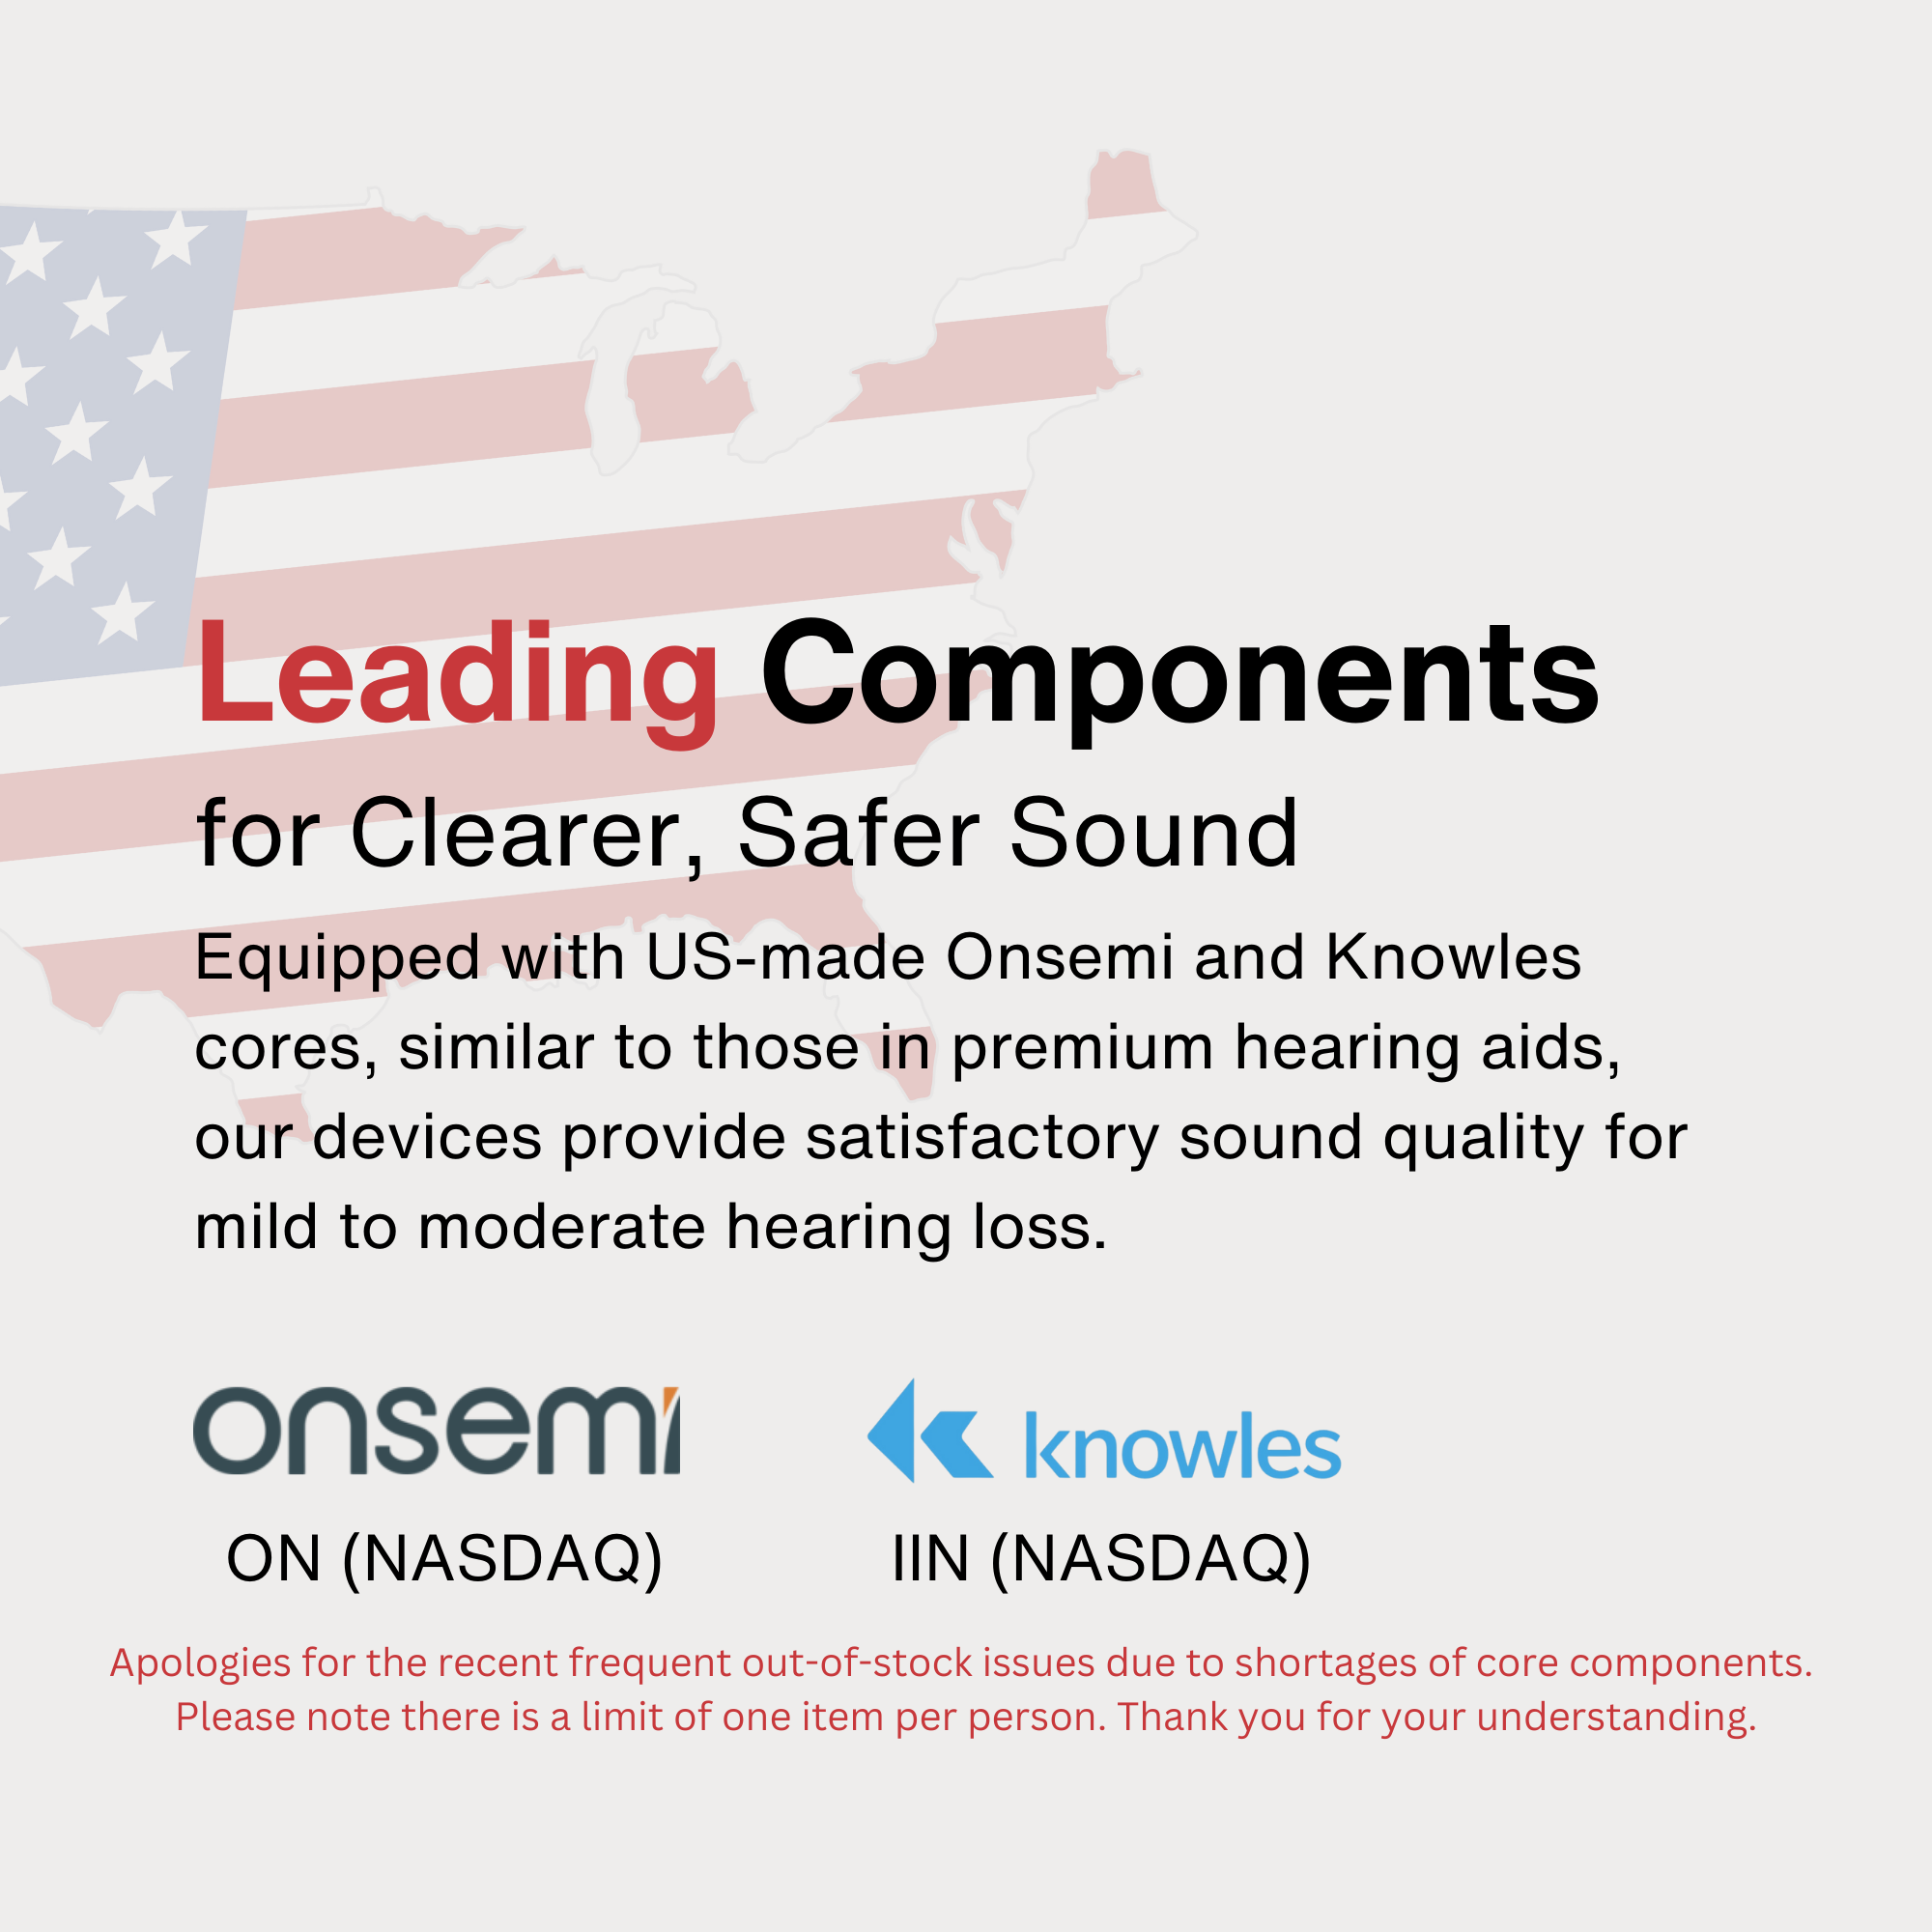 Equipped with US-made Onsemi and Knowles cores, similar to those in premium hearing aids, our devices provide satisfactory sound quality for mild to moderate hearing loss.